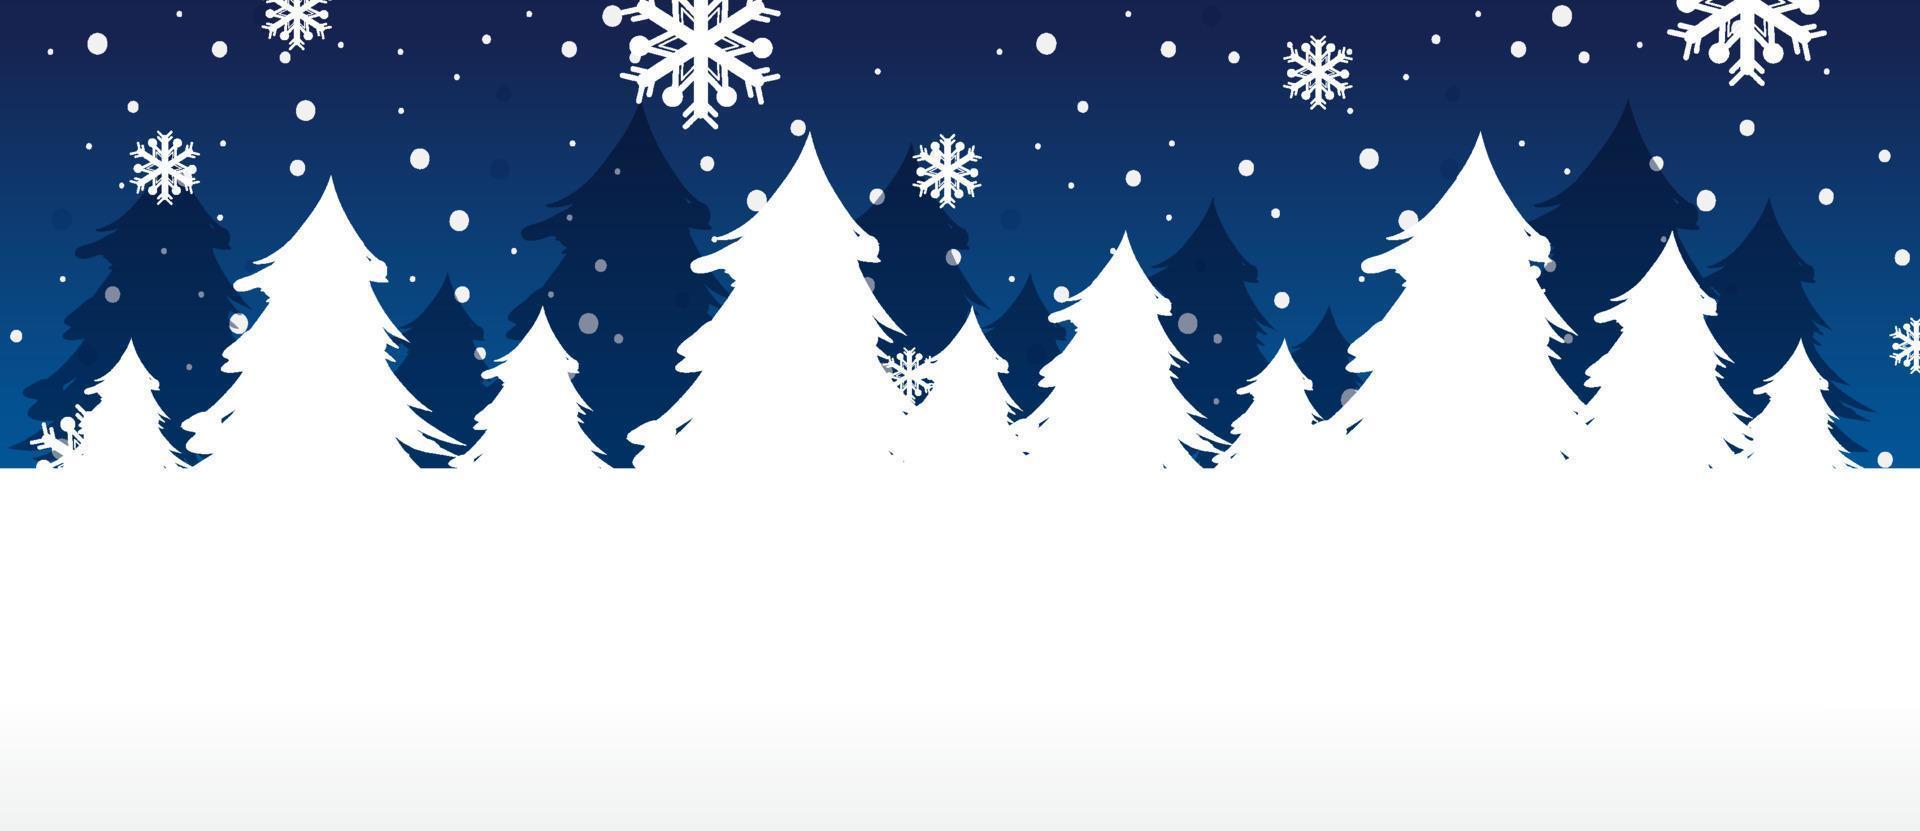 Merry Christmas banner with empty white pine silhouette vector